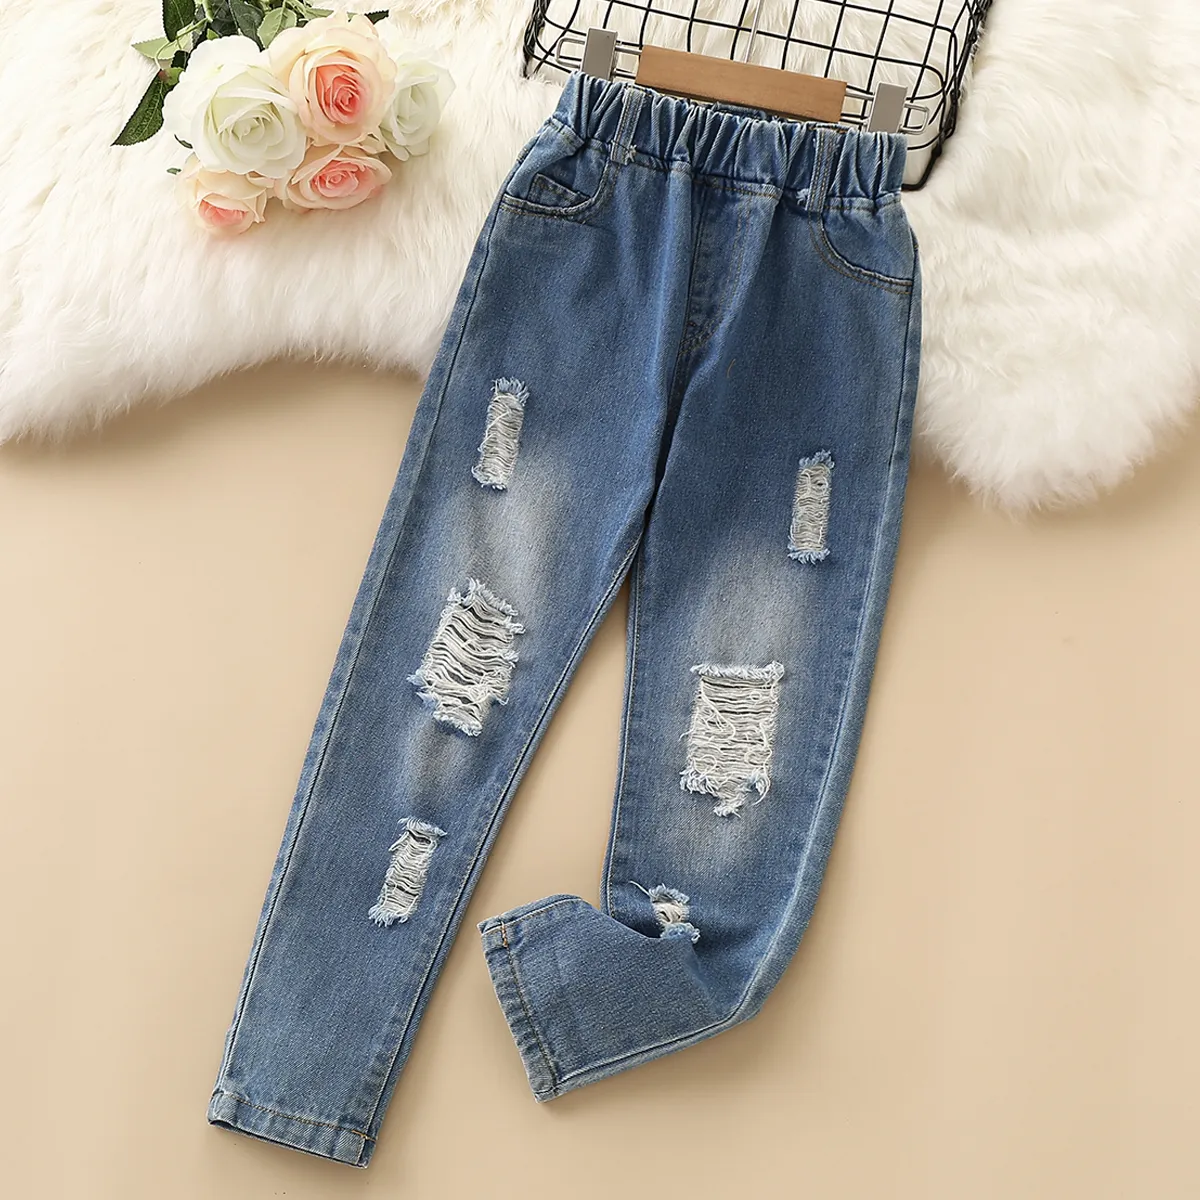 Jeans Casual Boys Jeans Solid Elastic Waist Long Kids Pants Fashion Loose Holes Boys Denim Trousers for 6 8 10 12 Years Children 230322